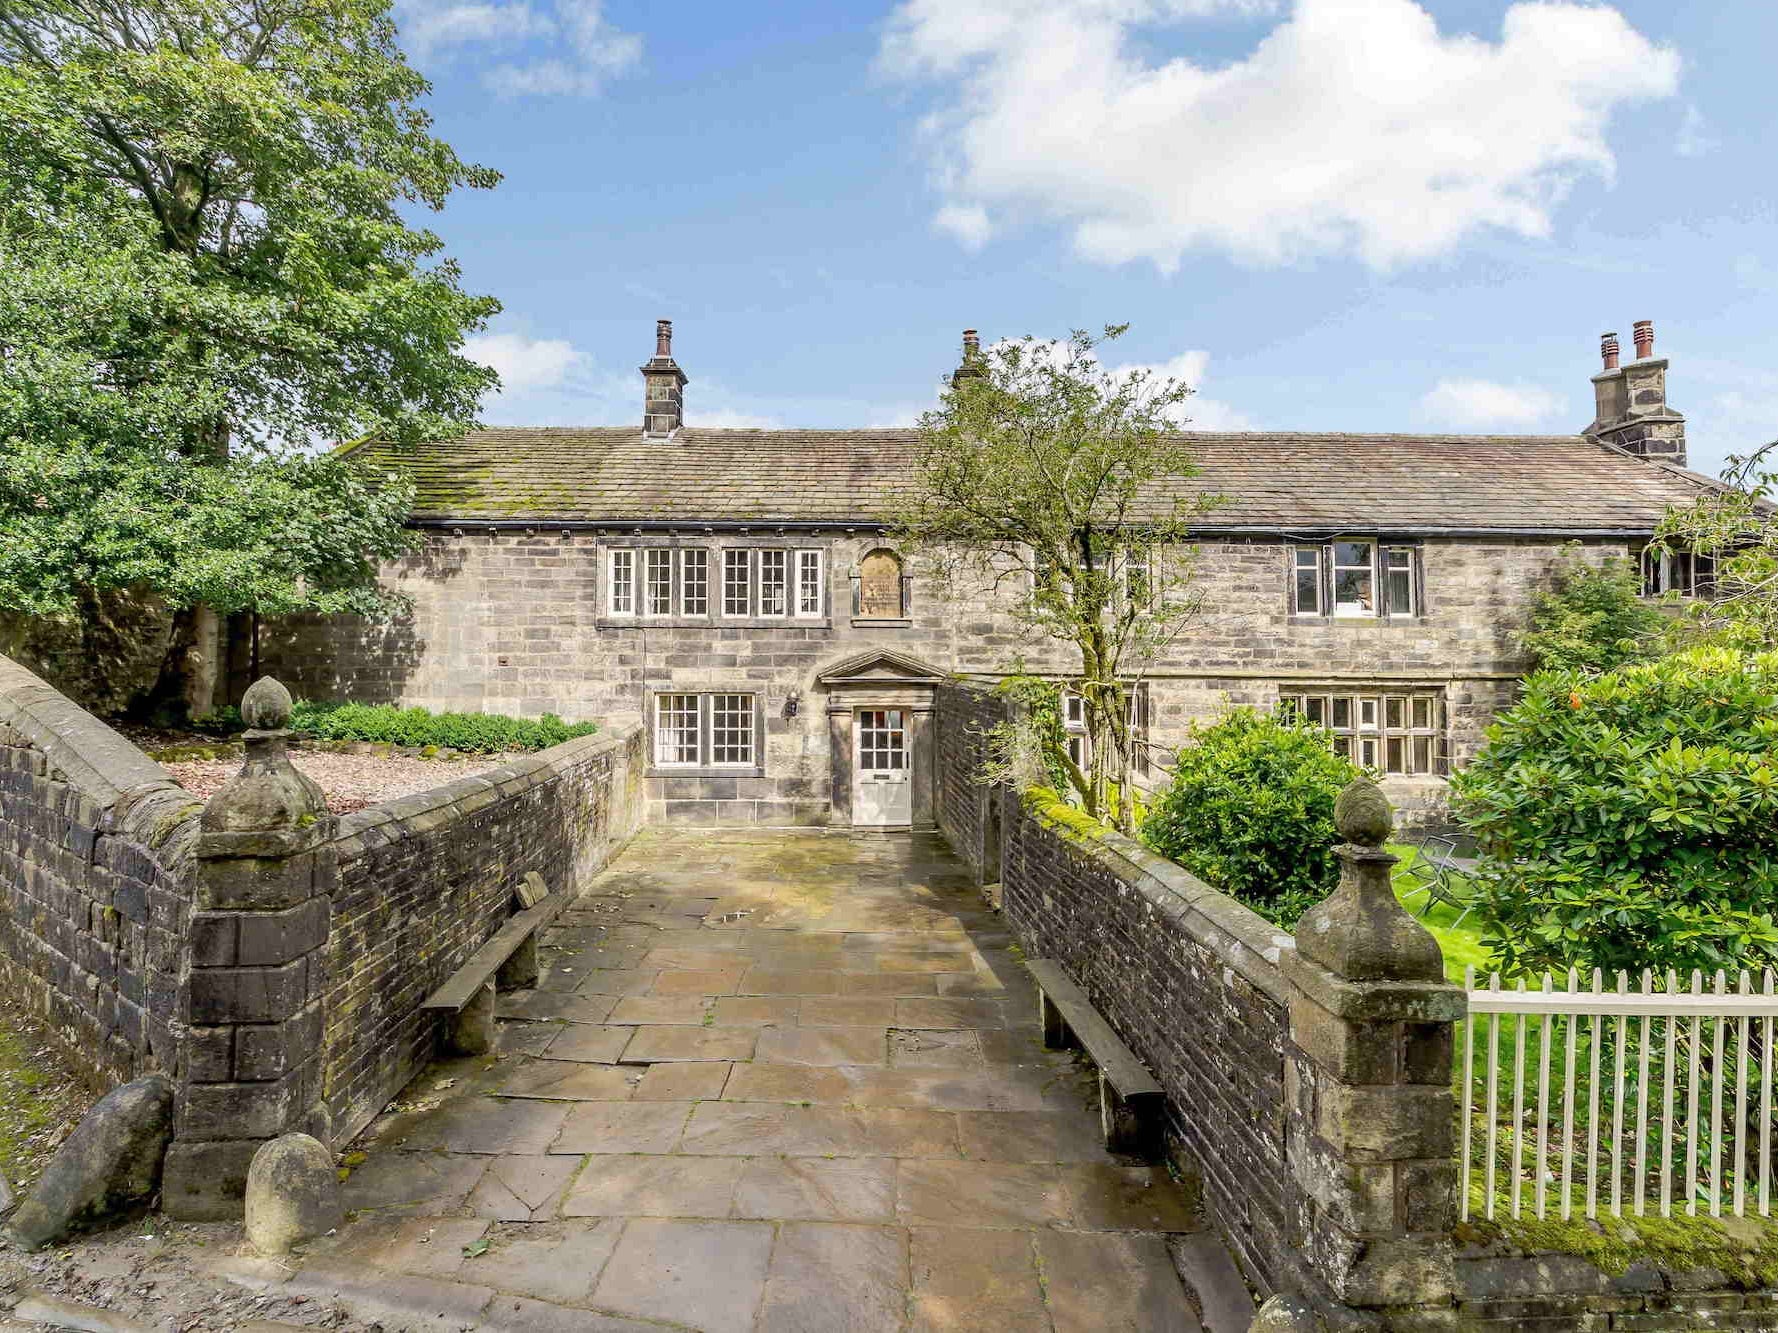 Ponden Hall, Stanbury, Keighley, West Yorkshire MAIN EXT